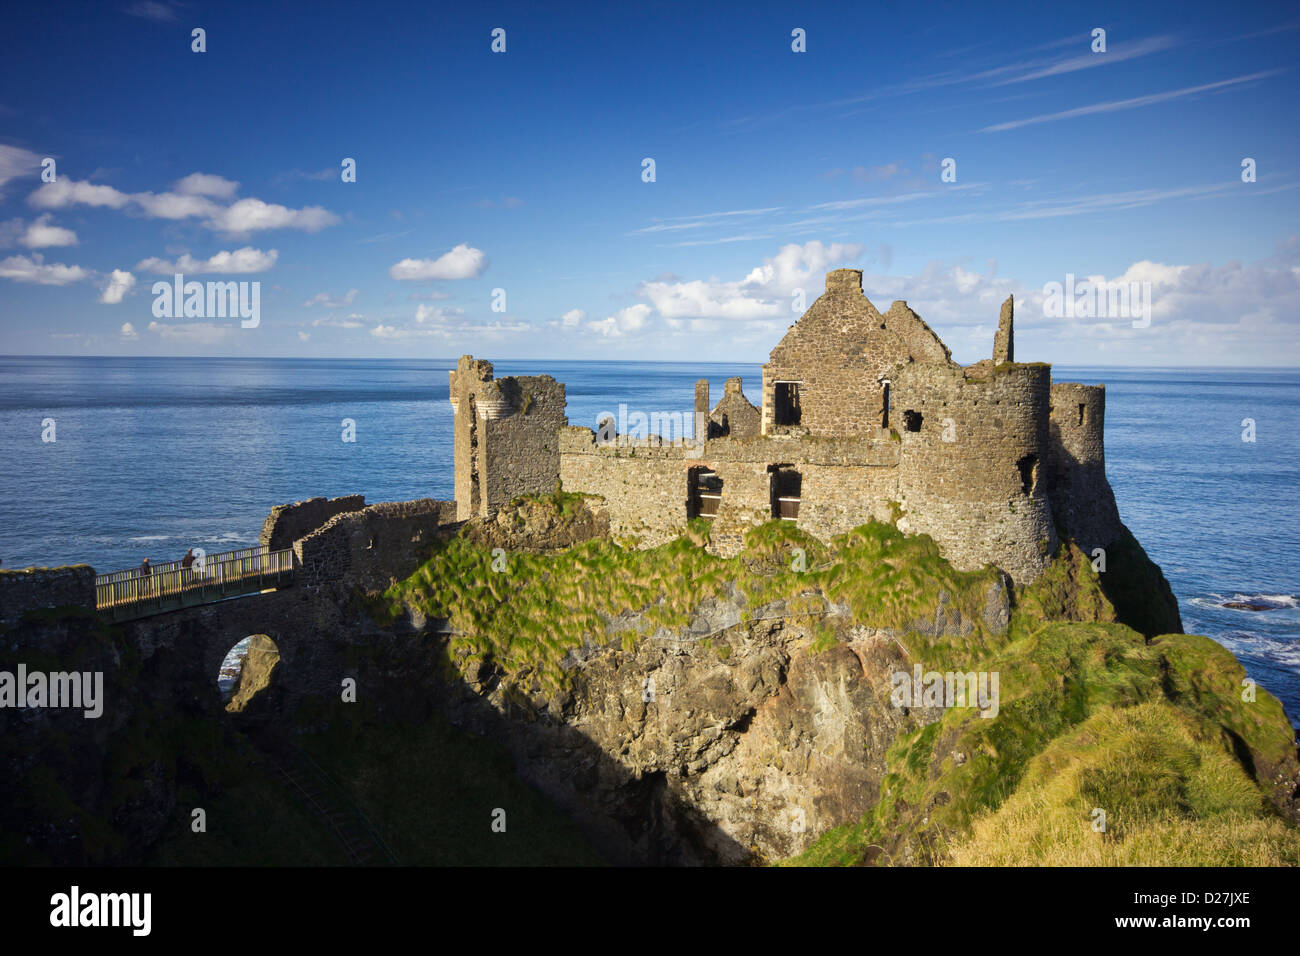 Dunluce Castle  - a famous landmark from the coast of Northern Ireland - on a beautiful sunny afternoon. Stock Photo